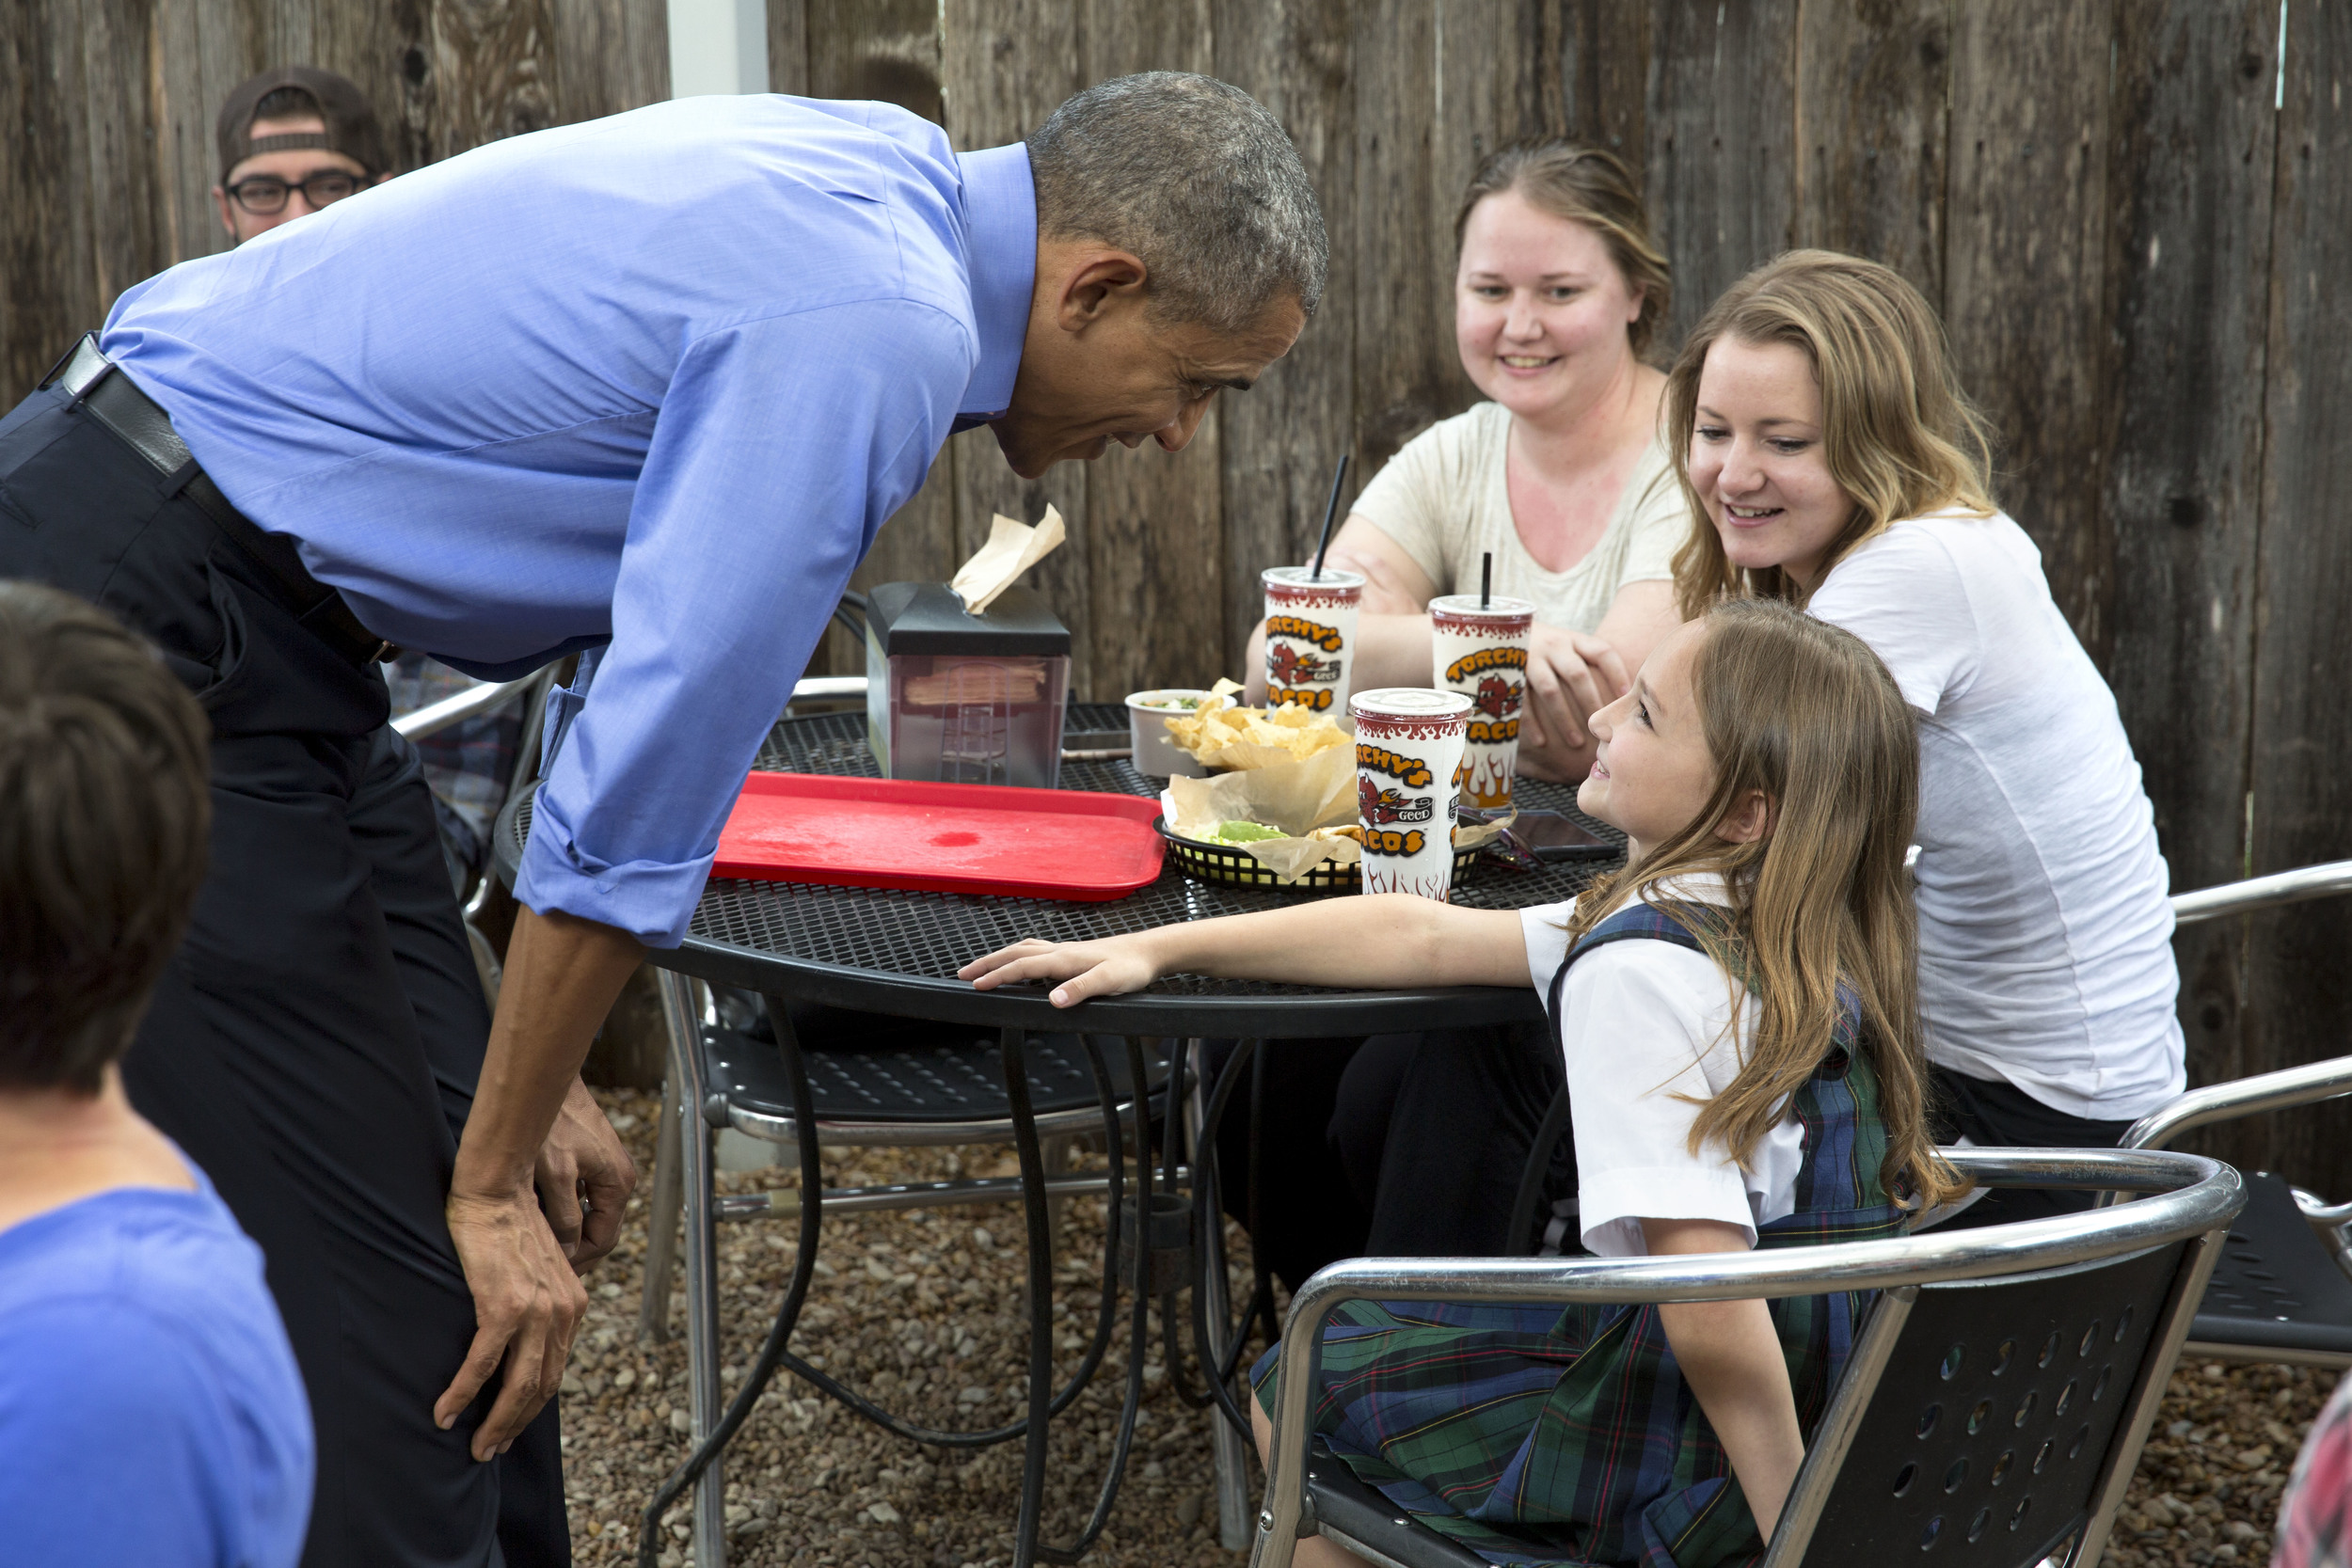 President Barack Obama talks to a young diner at Torchy’s Tacos in Austin, Tx. - 2016